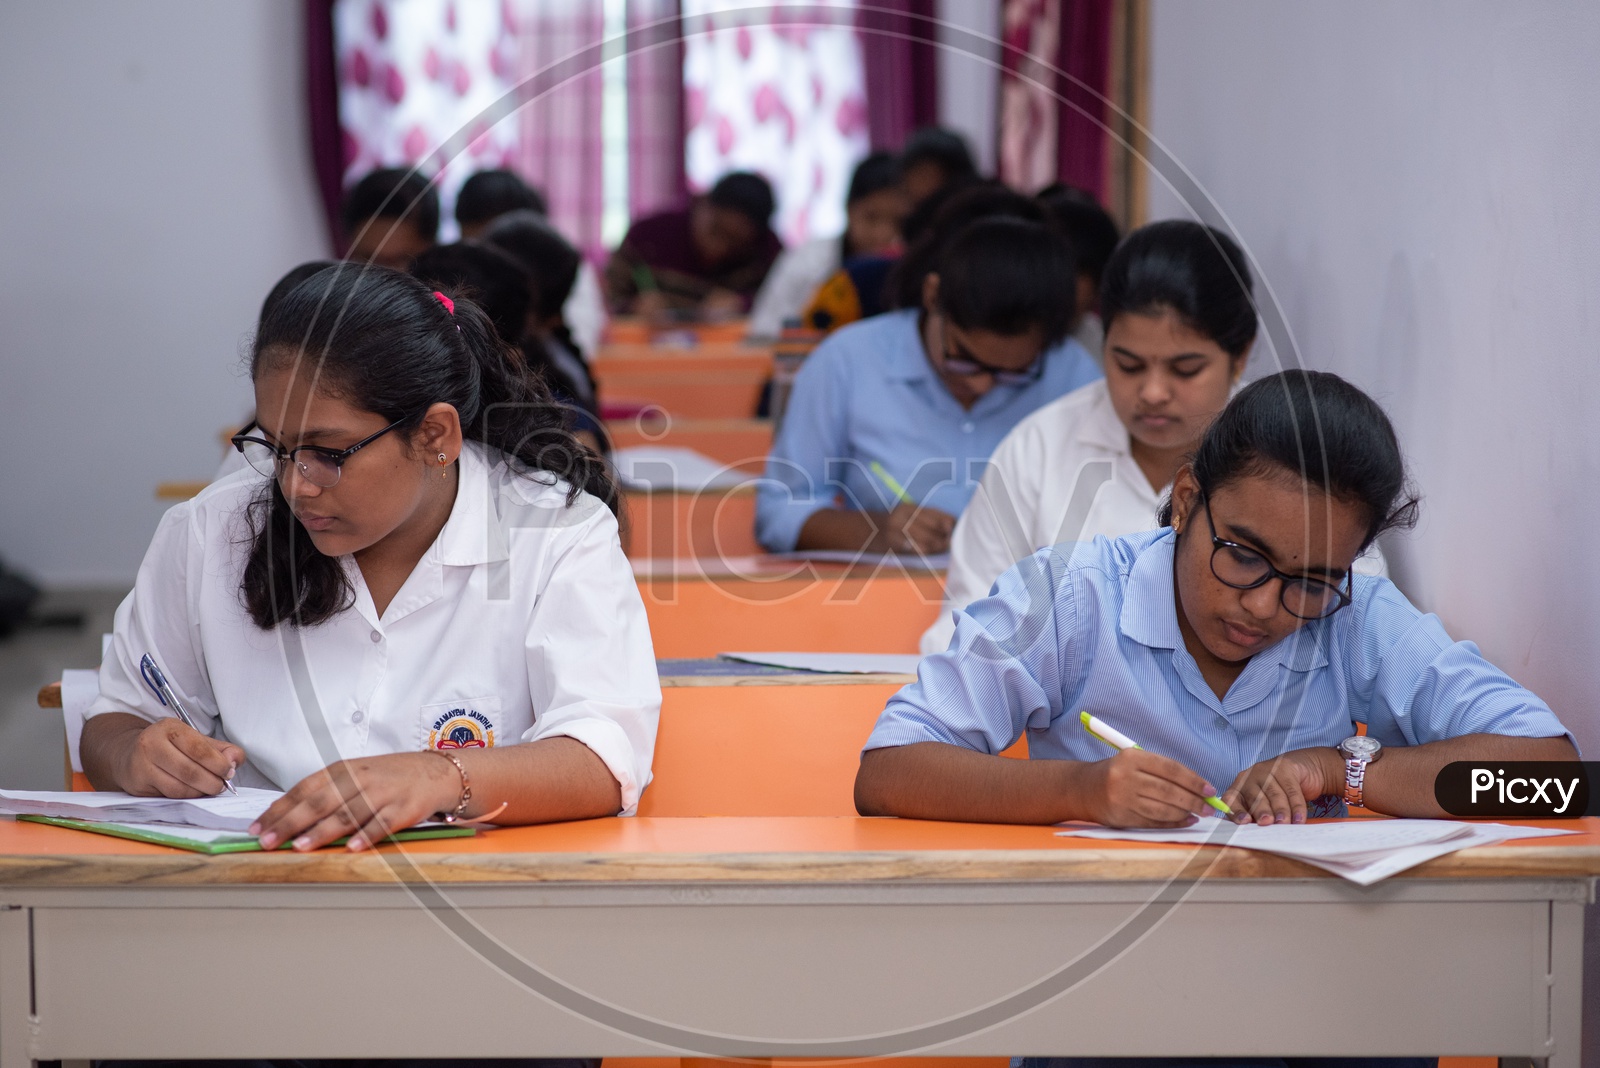 Students writing exams at an educational institute in India